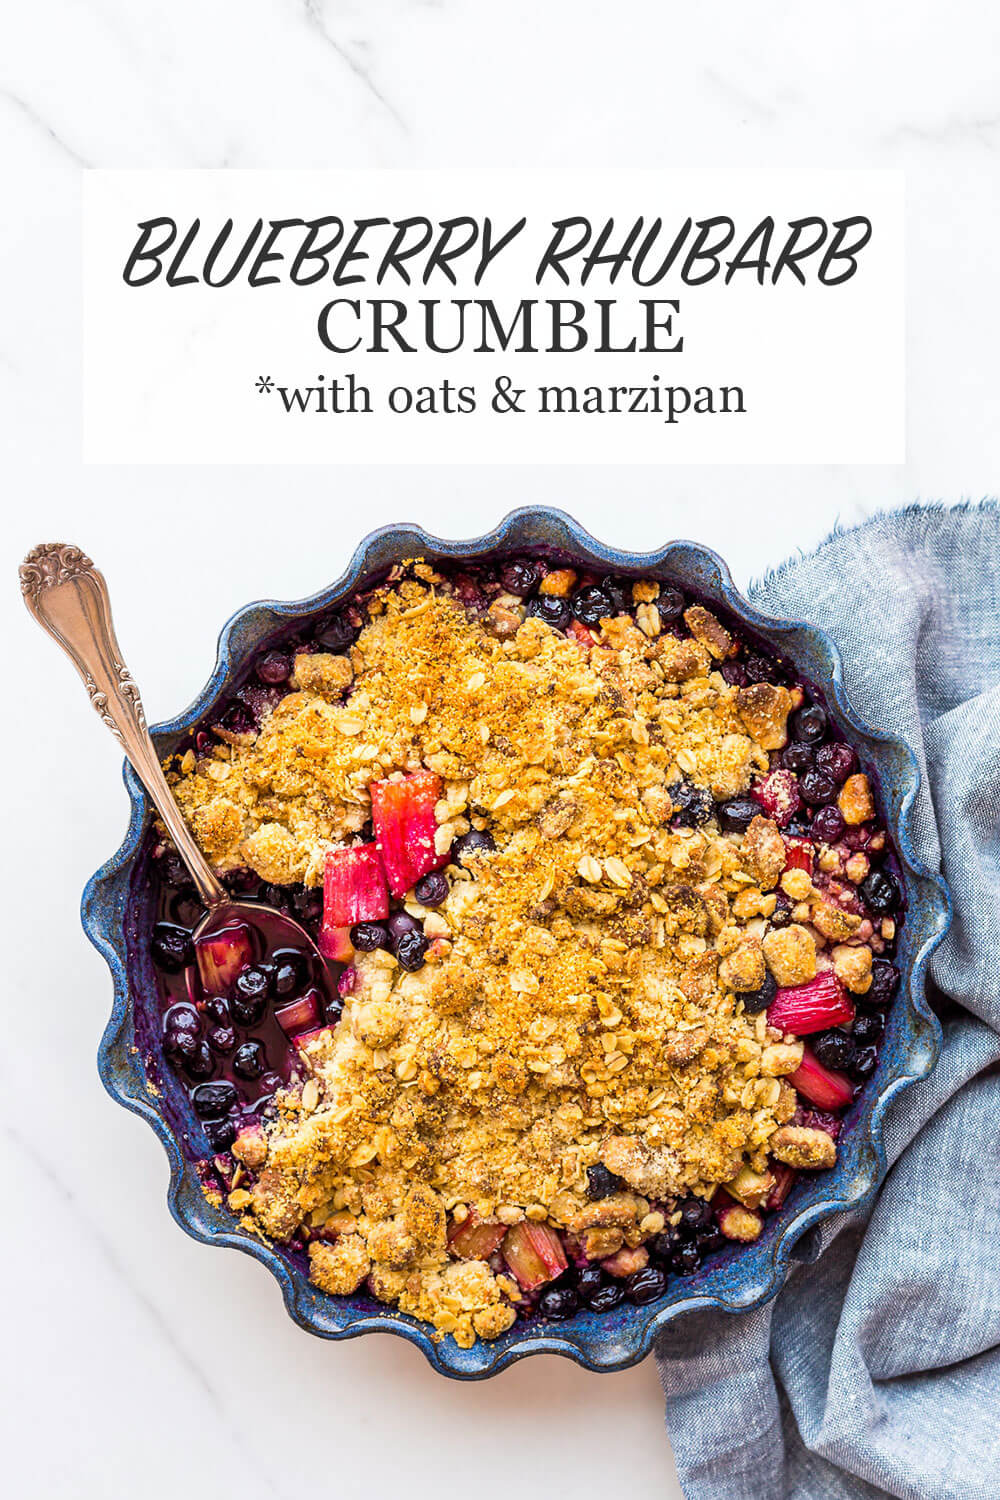 Blueberry rhubarb crisp with a marzipan and oat crumble topping baked in a blue ceramic baking dish with scalloped edges and served with a big serving spoon and blue linen 